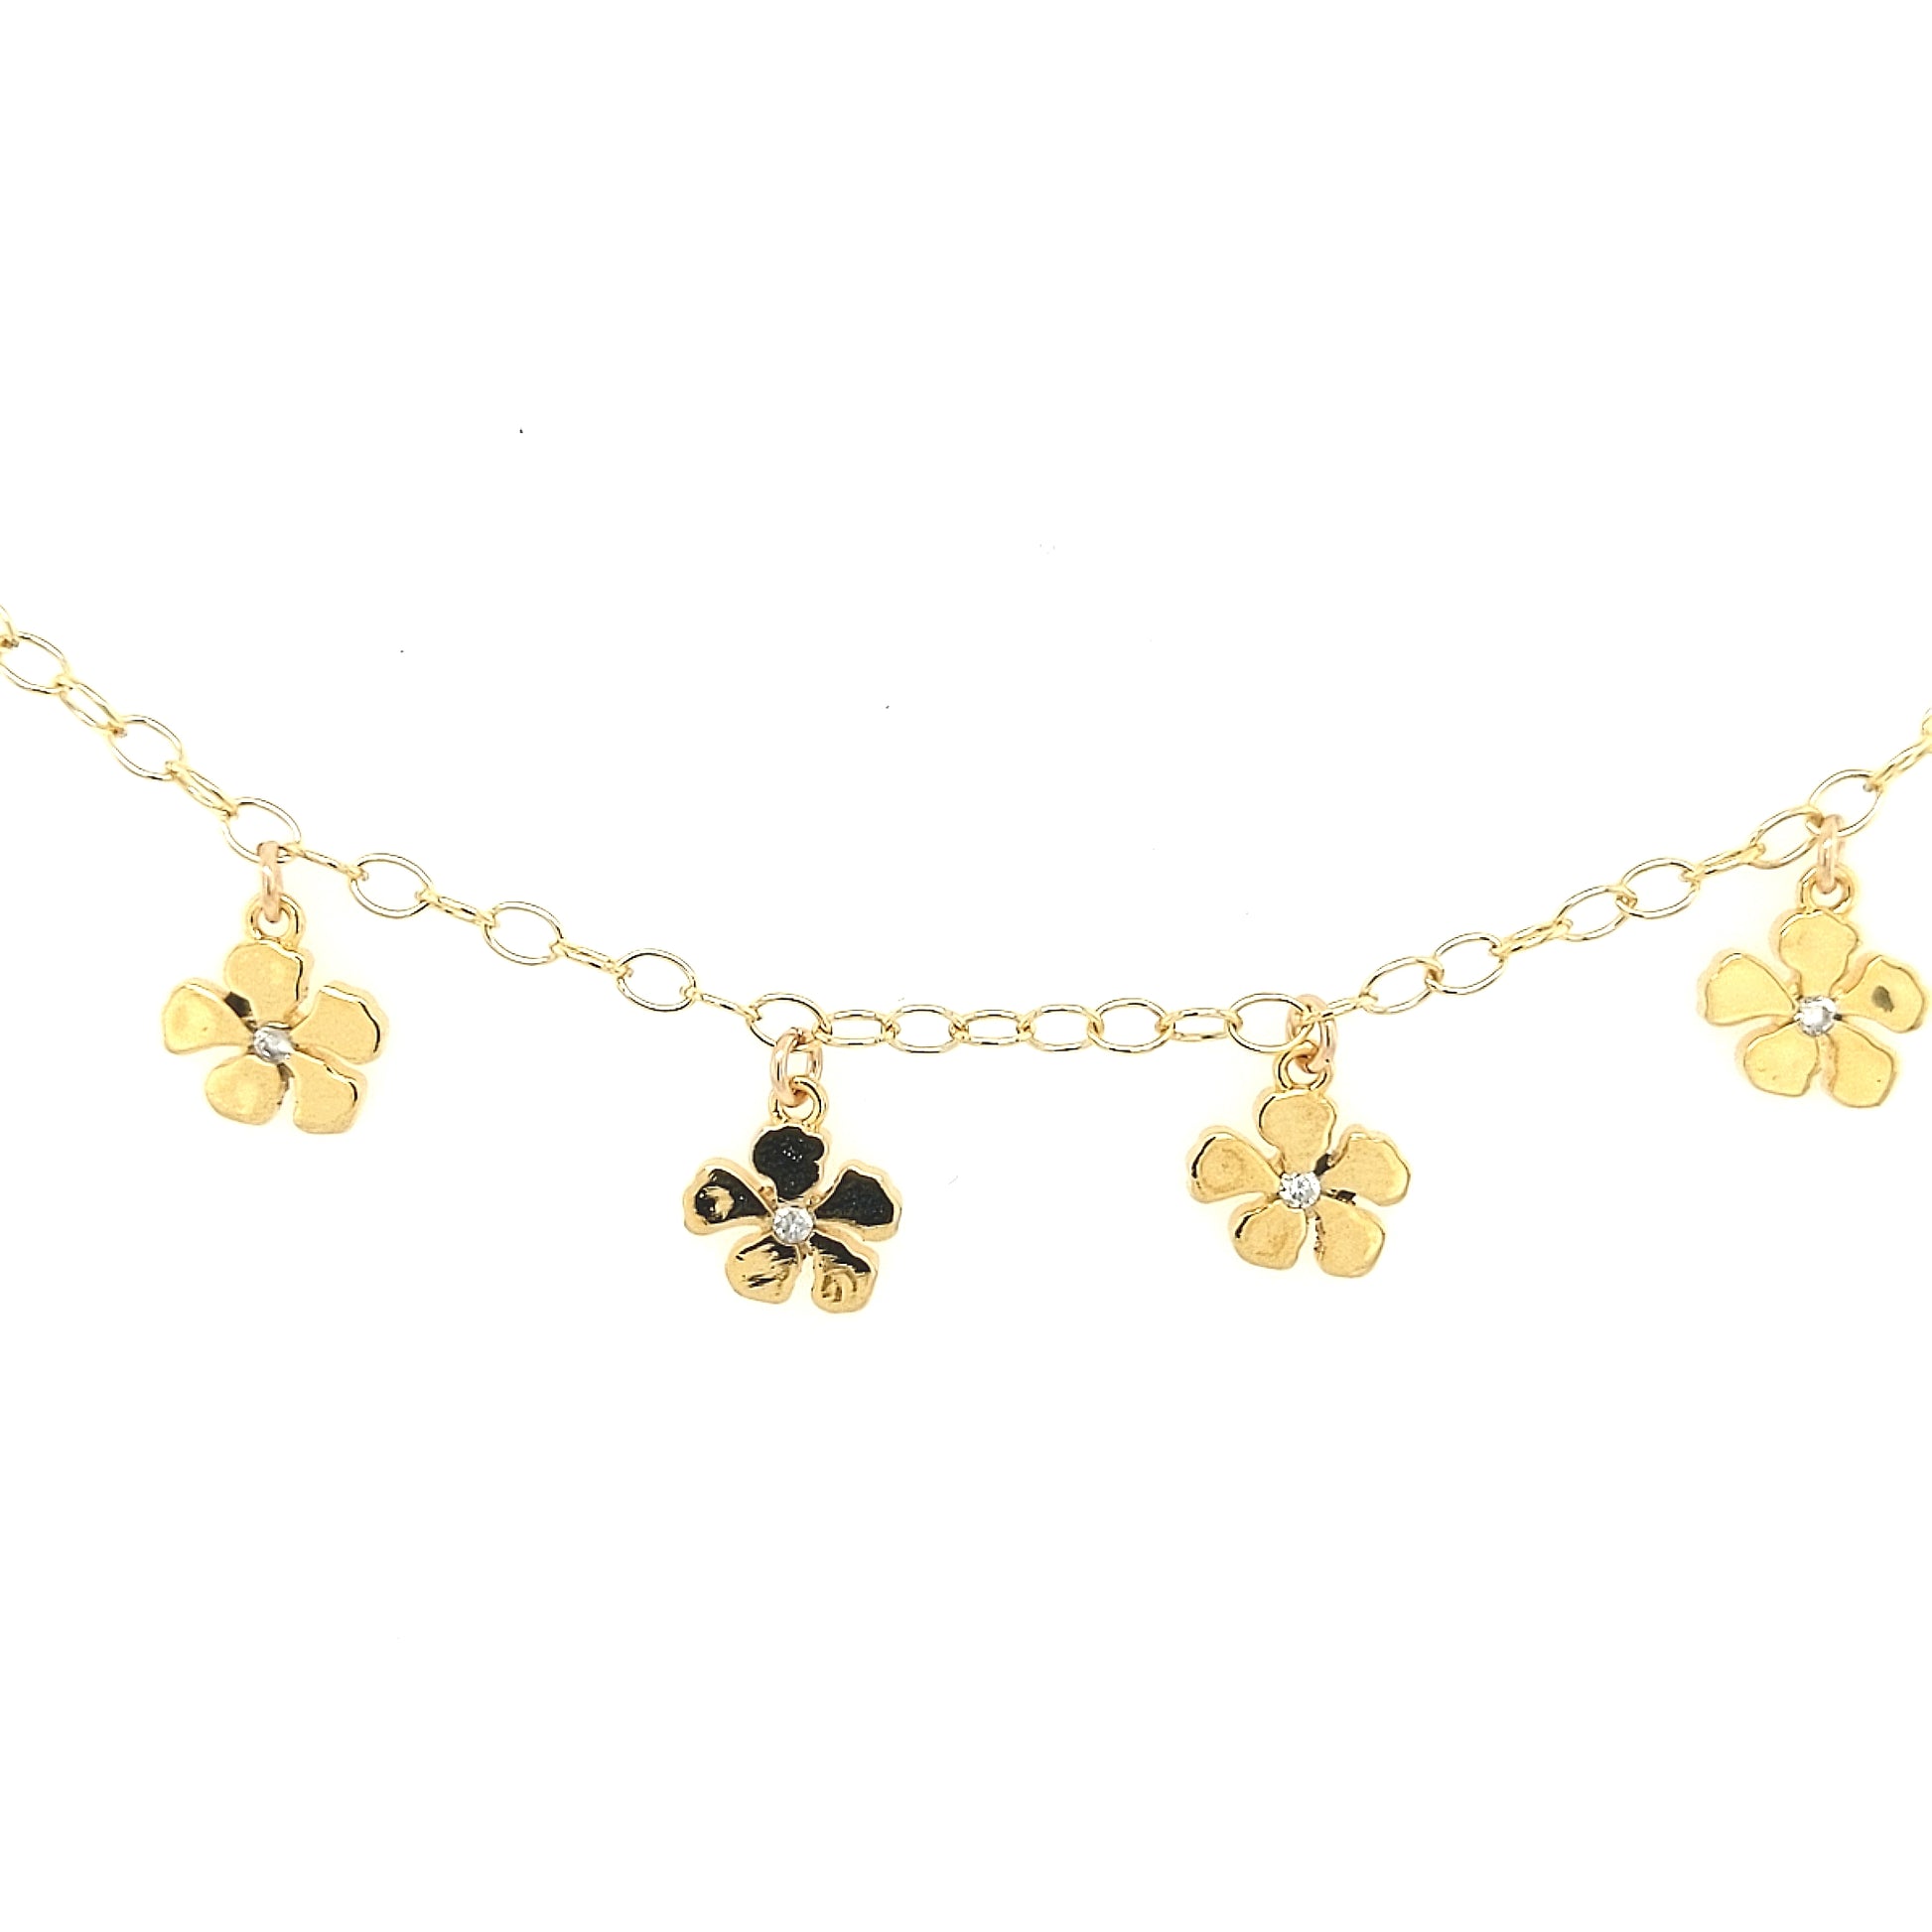 Gold Filled Chain With Hanging Gold Flowers Bracelet - HK Jewels